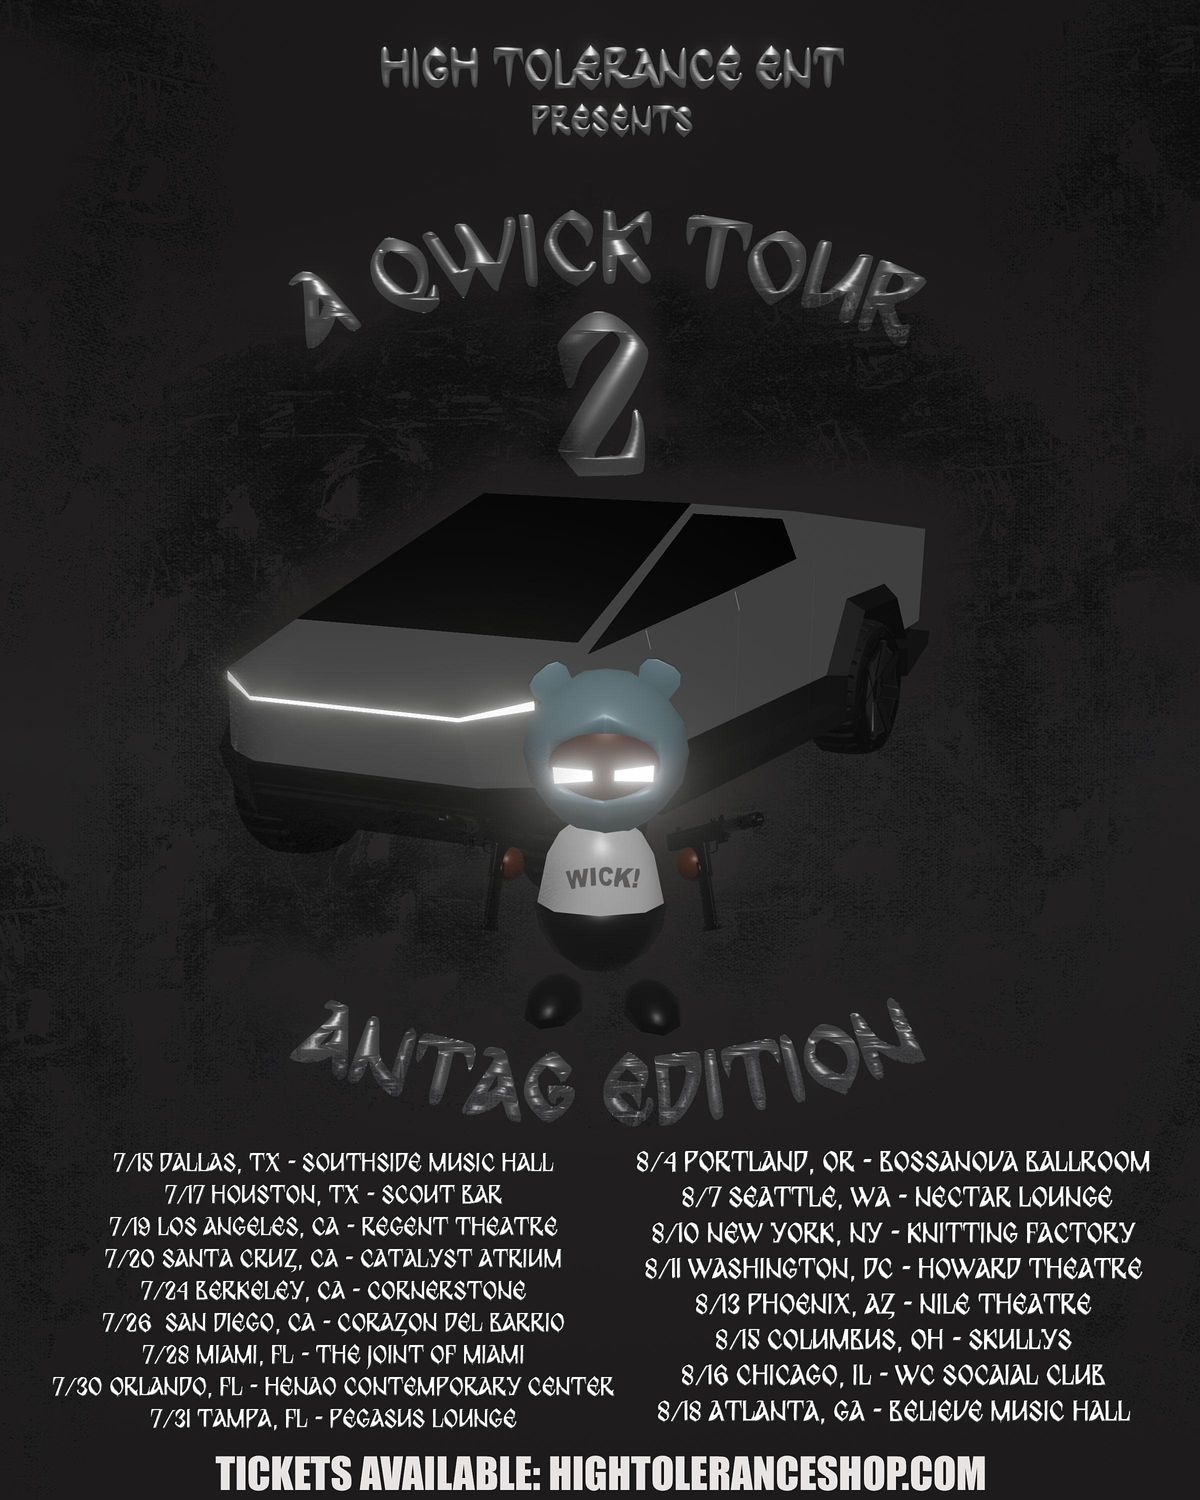 Autumn! Performing live! QWICK TOUR 2: ANTAG edition